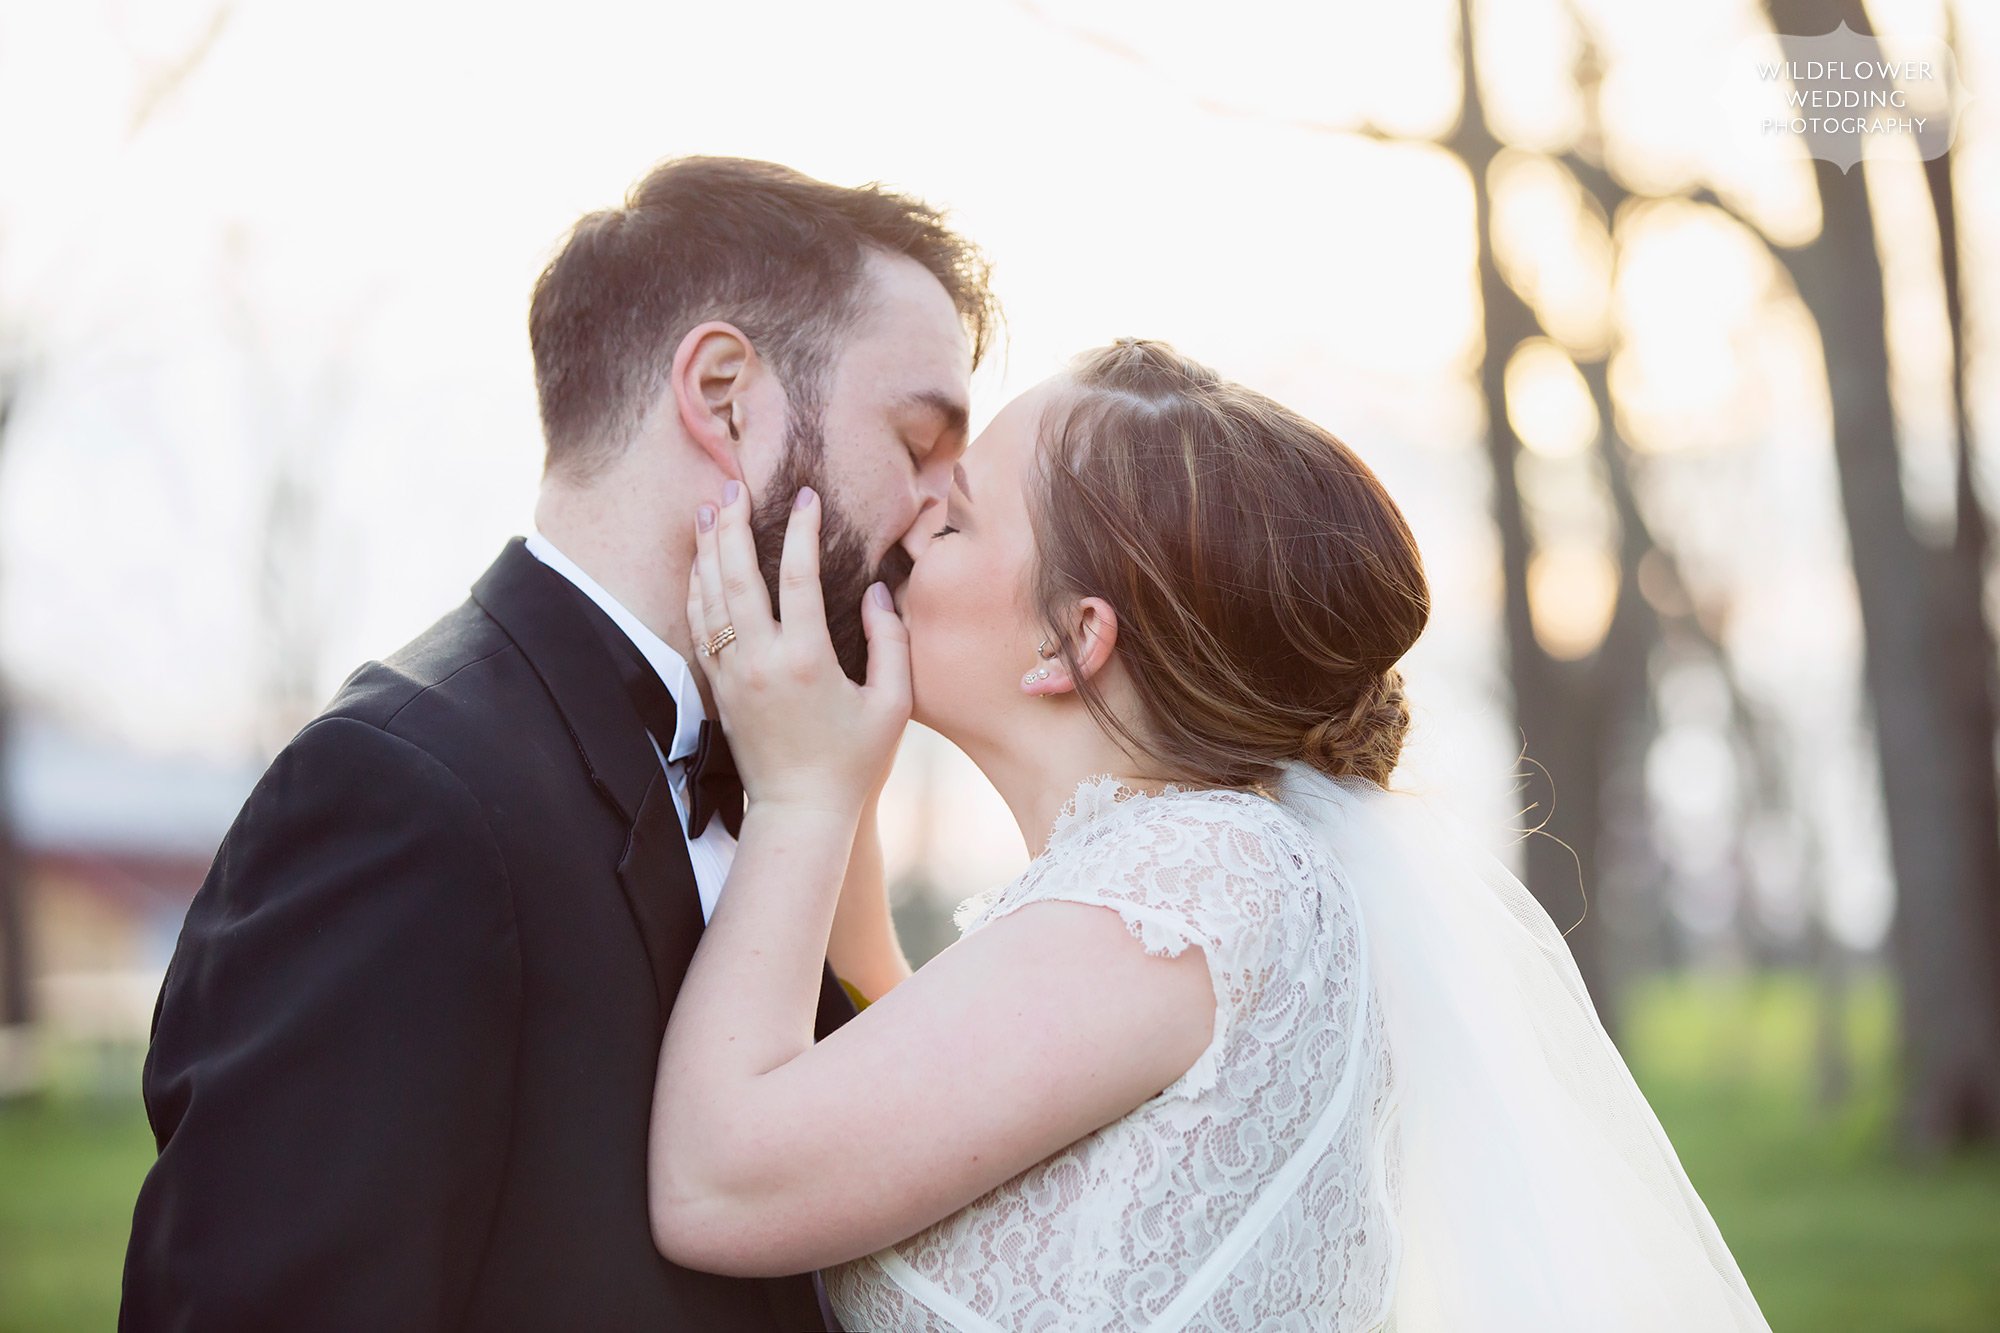 Sexy photo of the bride and groom kissing after their rustic elopement wedding in Columbia, MO.